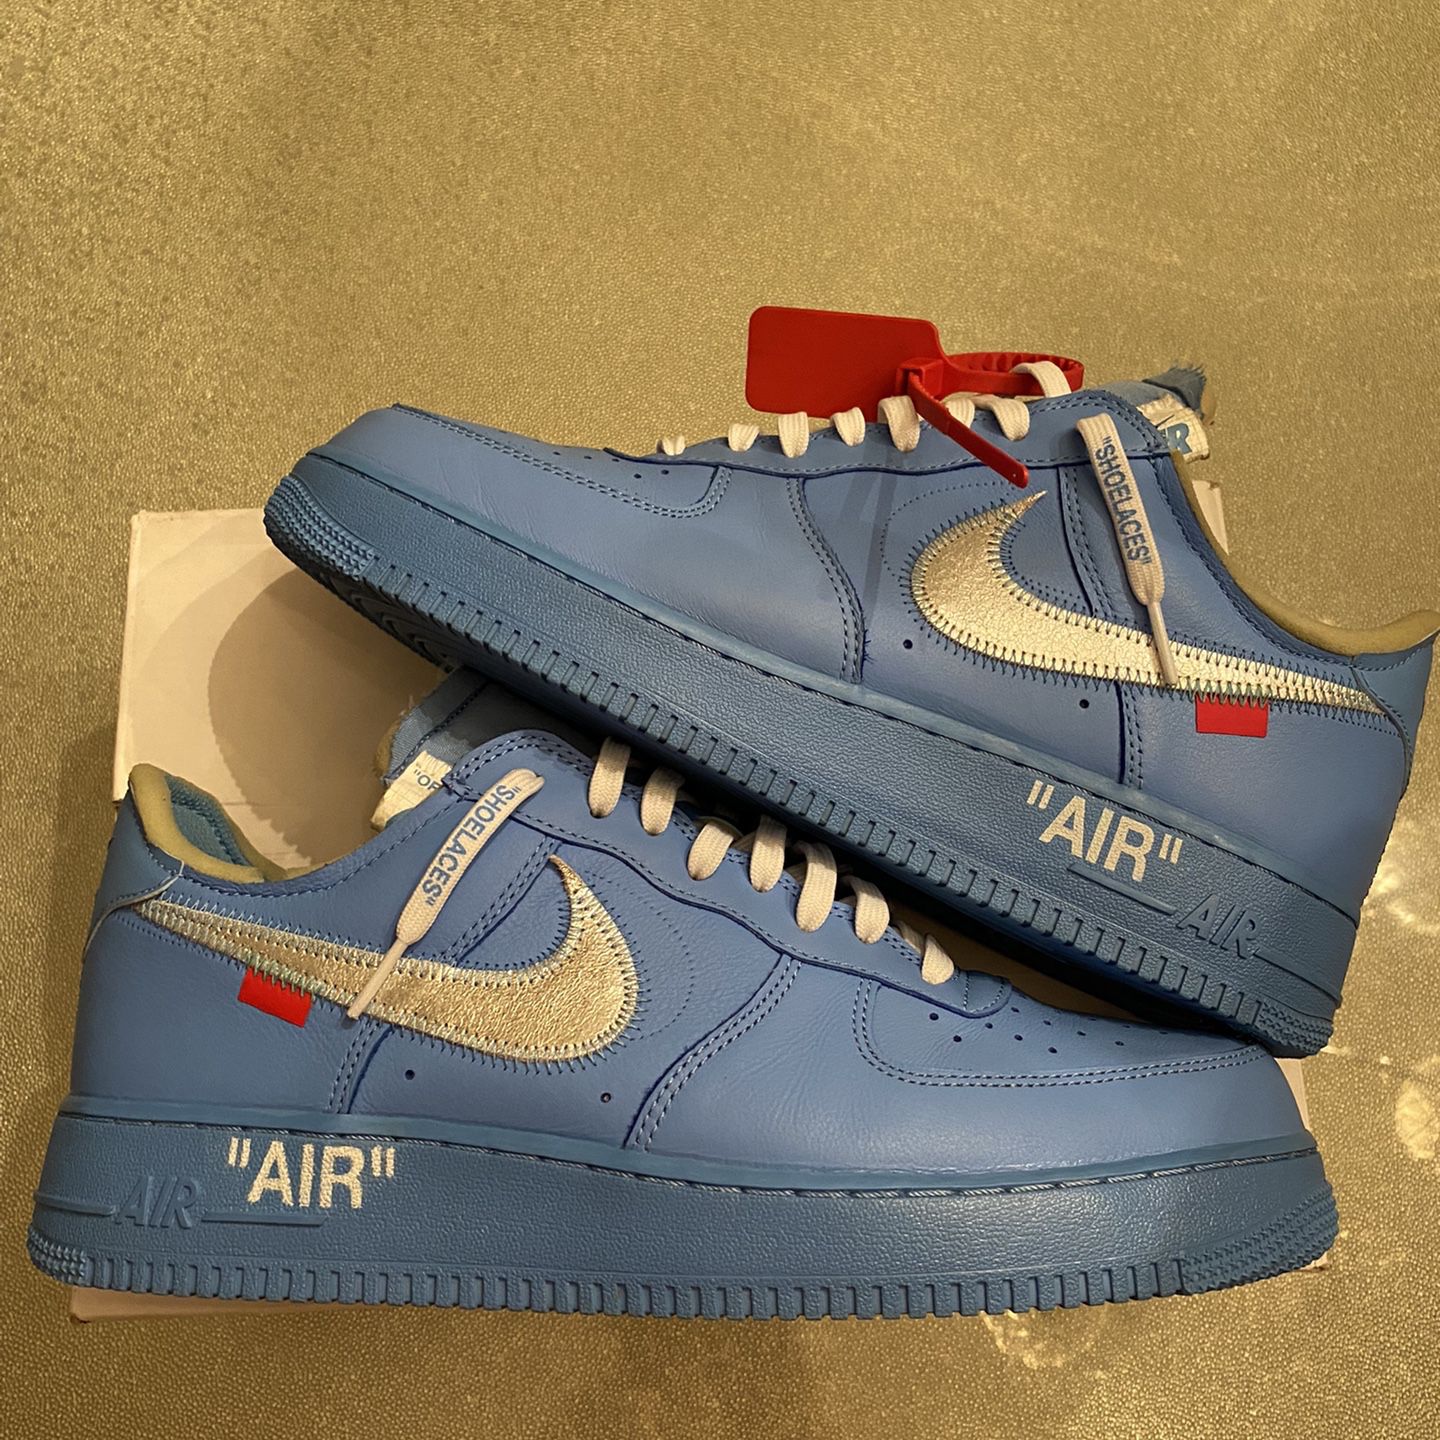 When Do You Think The OFF-WHITE x Nike Air Force 1 Low MCA Will